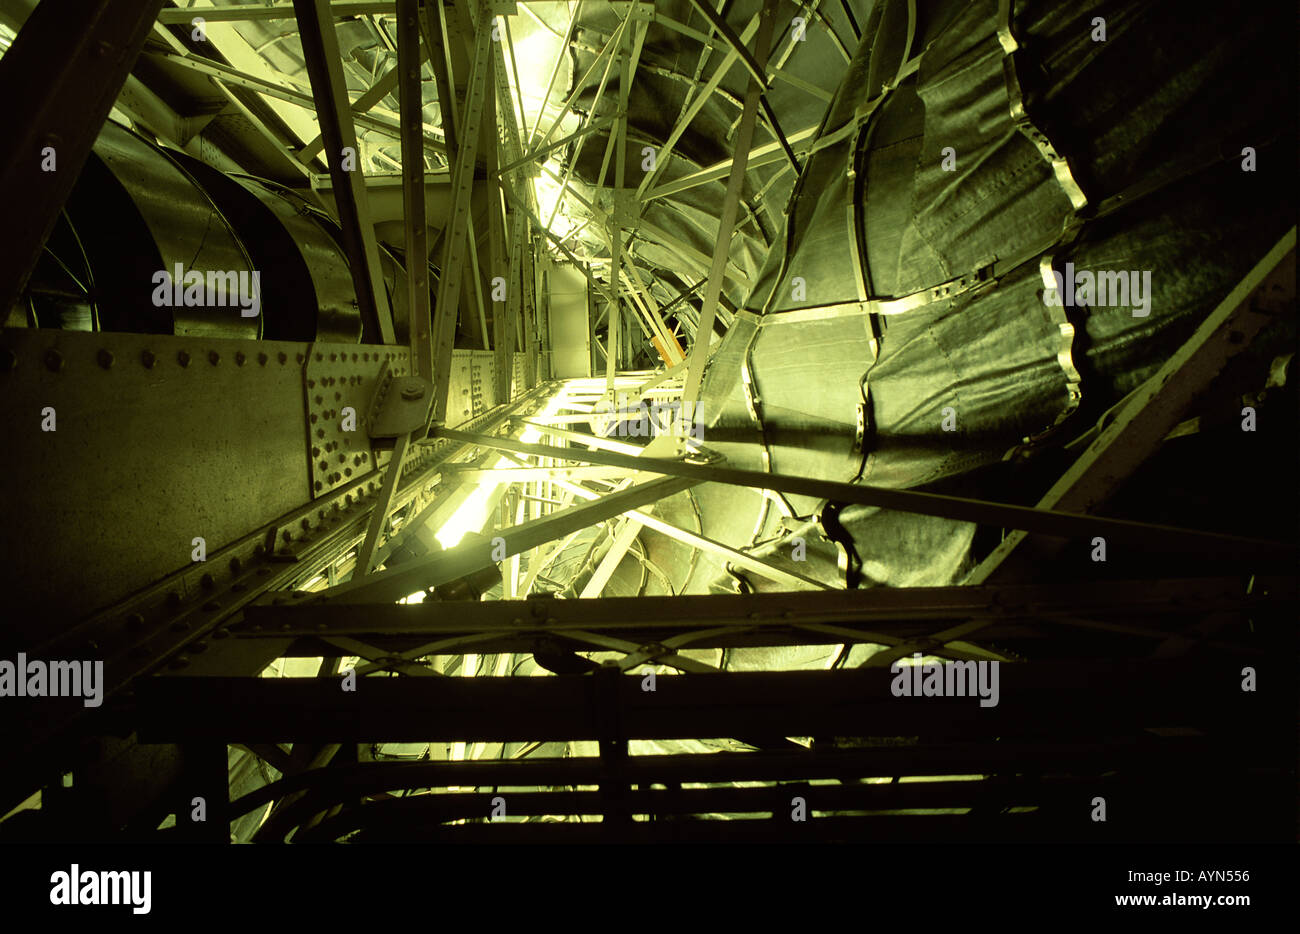 The Statue of Liberty - interior - looking up. Stock Photo